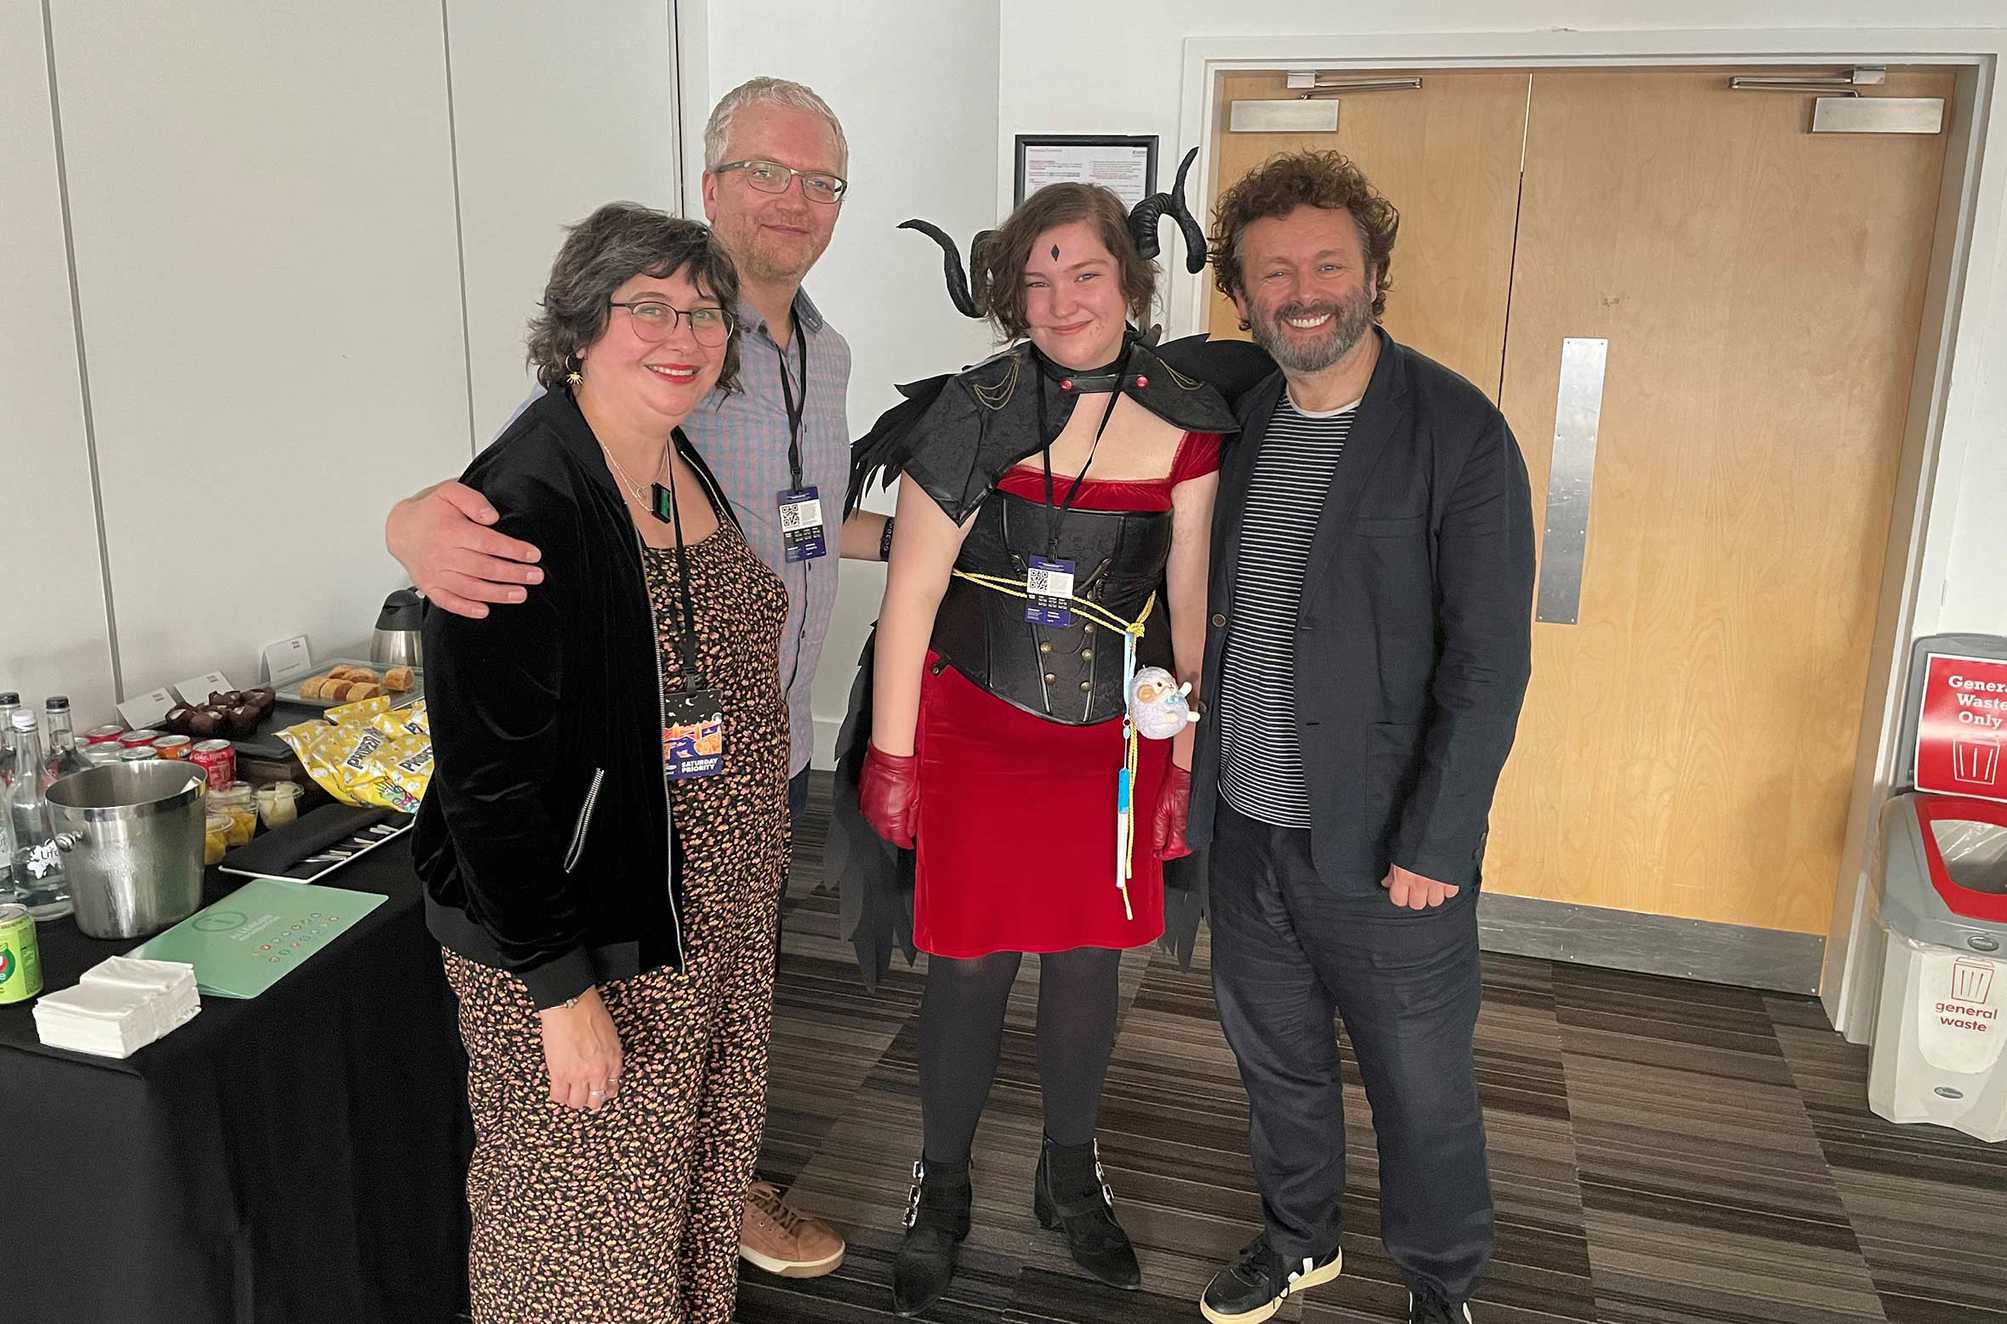 Elsie and her family with actor Michael Sheen, star of one of her favourite shows, Good Omens